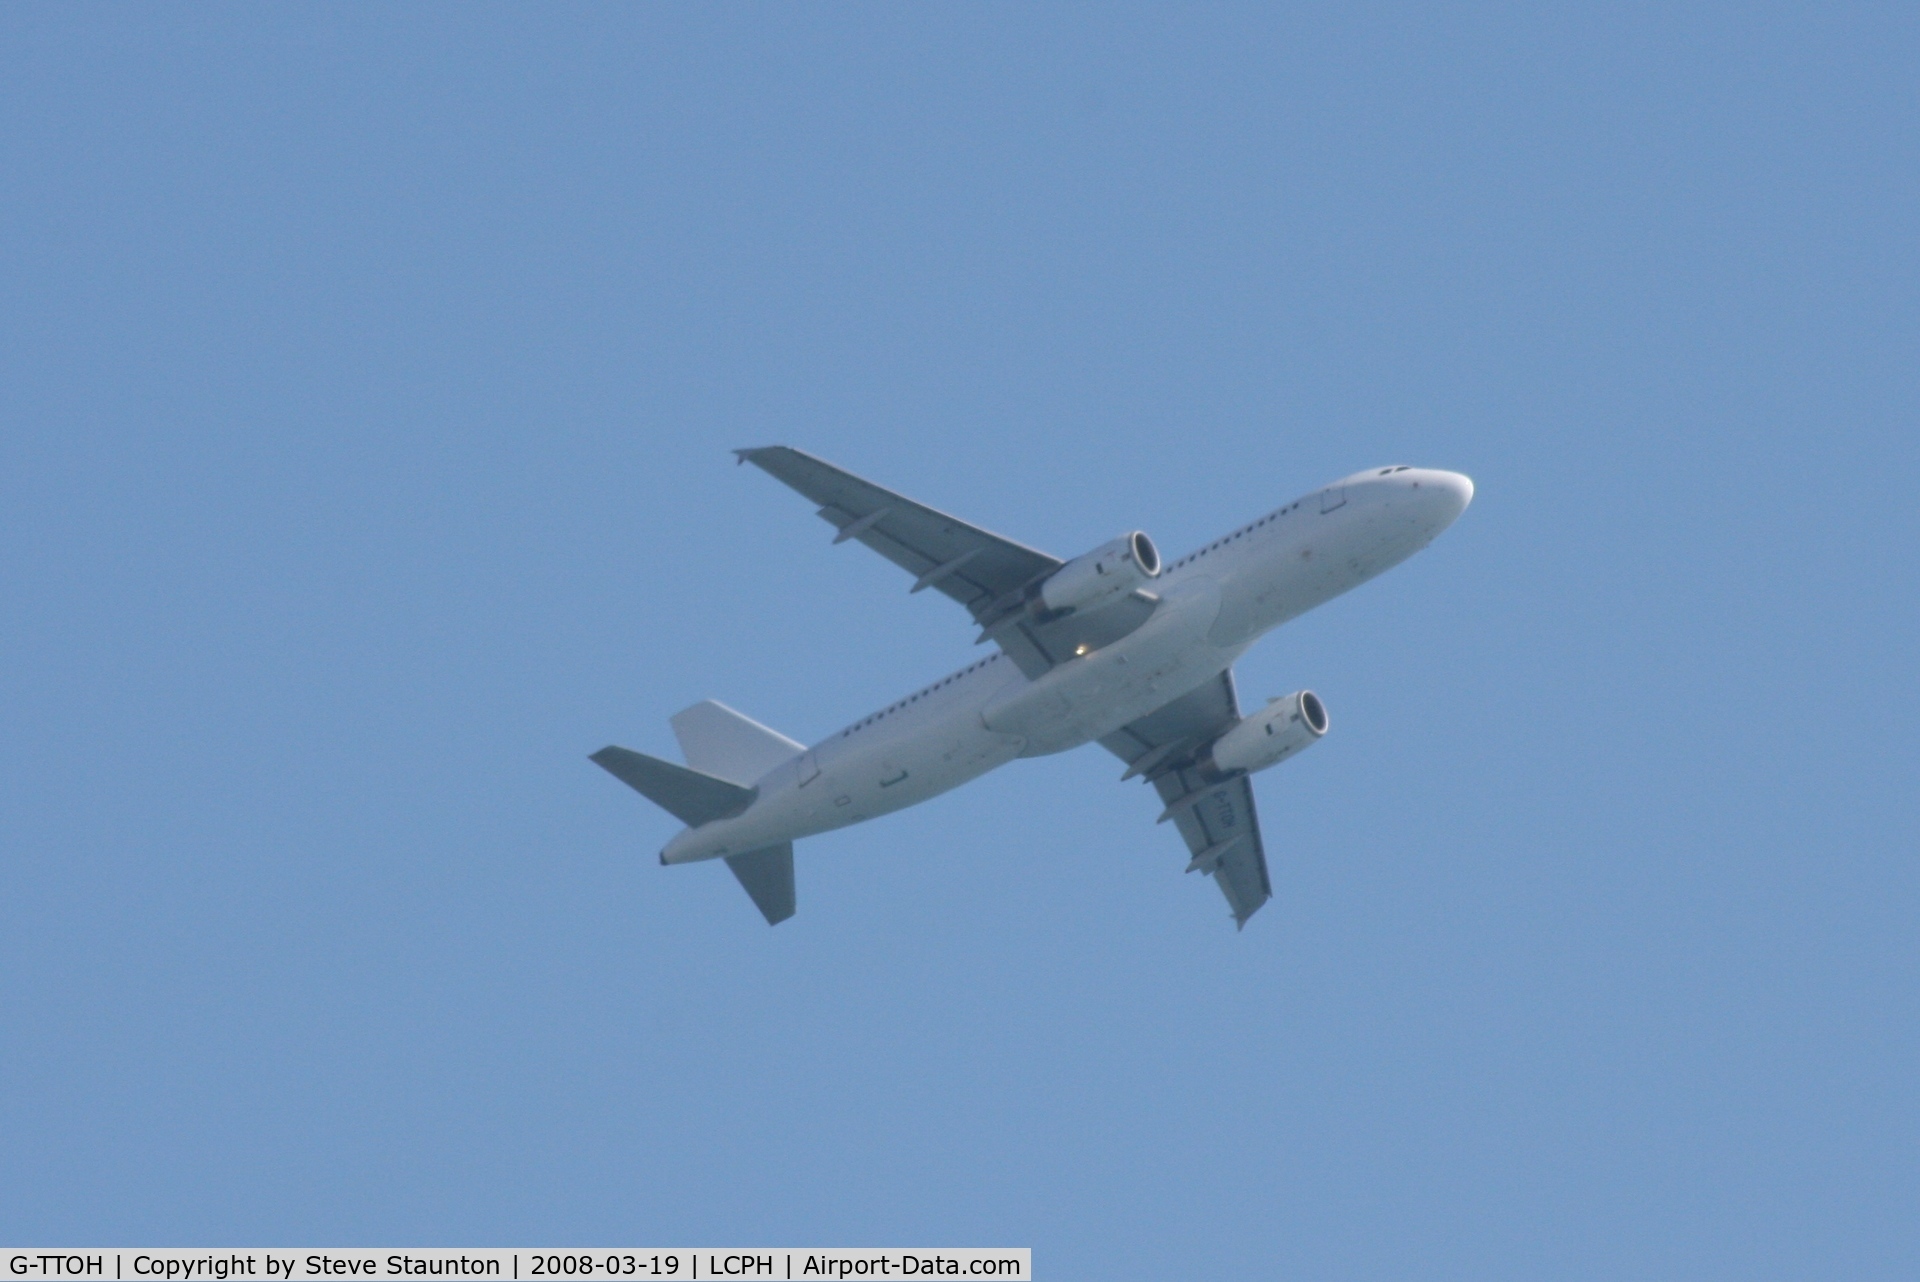 G-TTOH, 2003 Airbus A320-232 C/N 1993, Taken on the approach to Paphos Airport, Cyprus (Climbing out this way today)